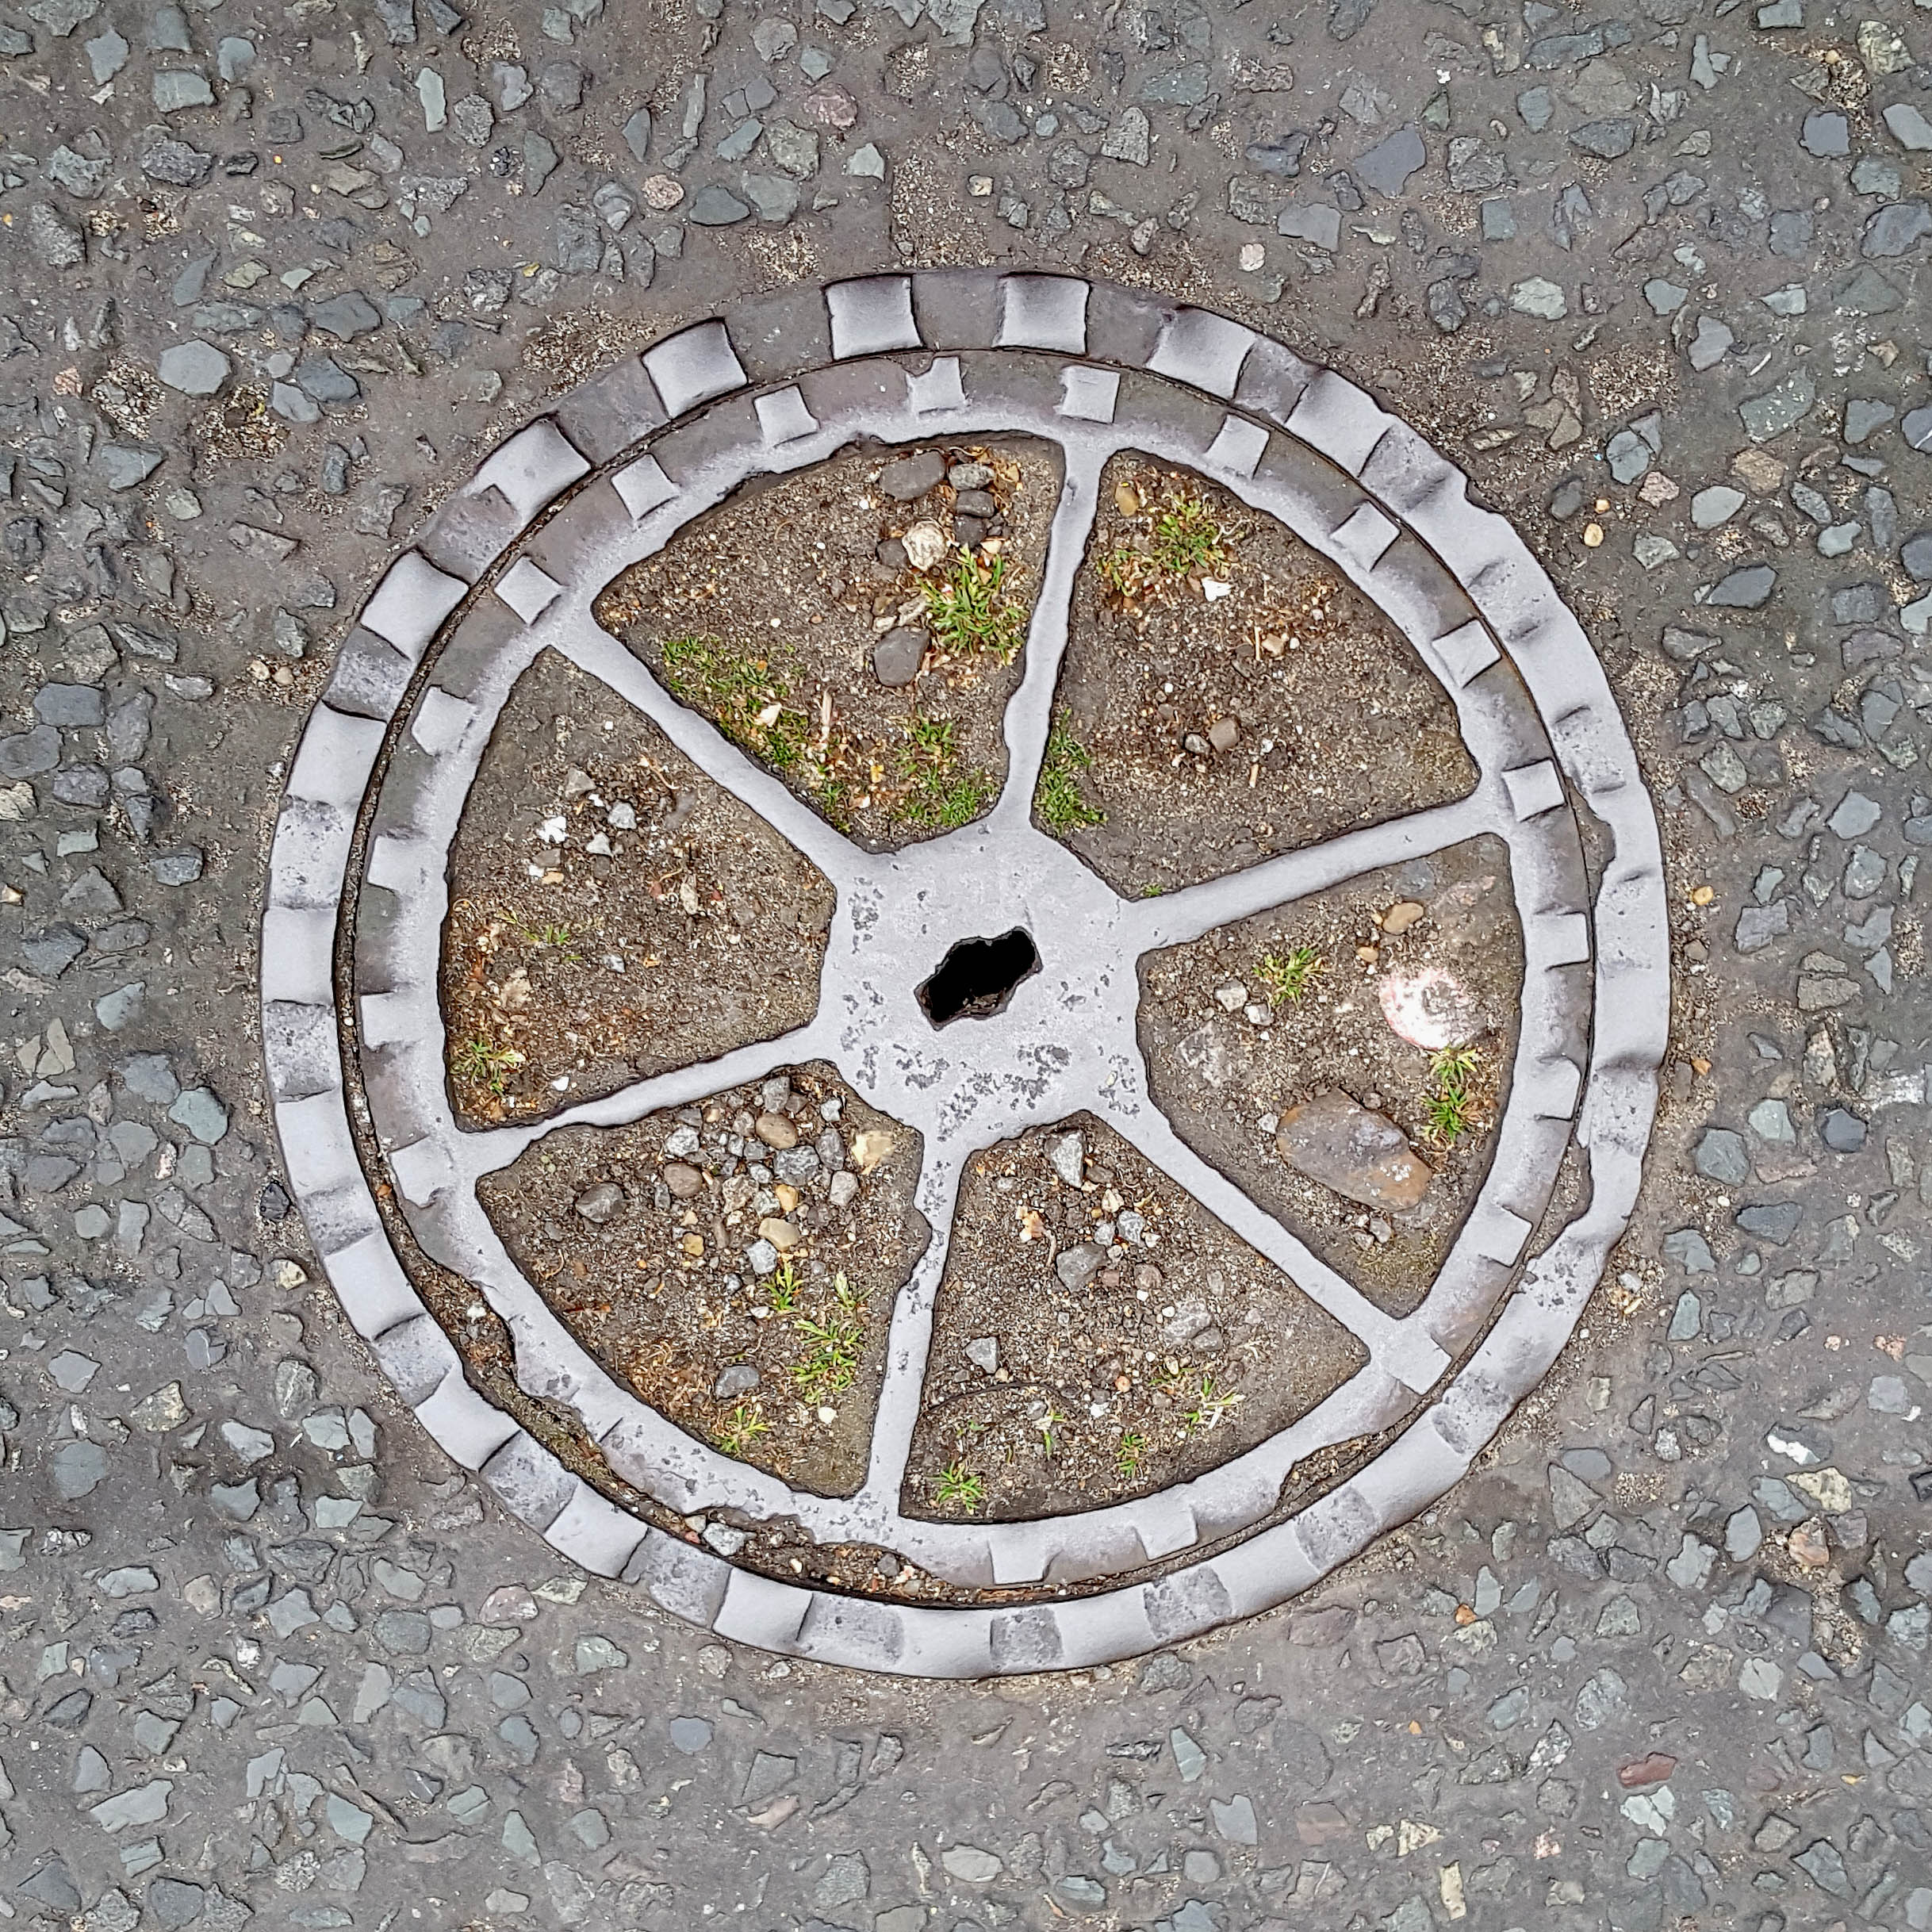 Manhole Cover, London - Cast iron surround with dirt centre divided into six segments